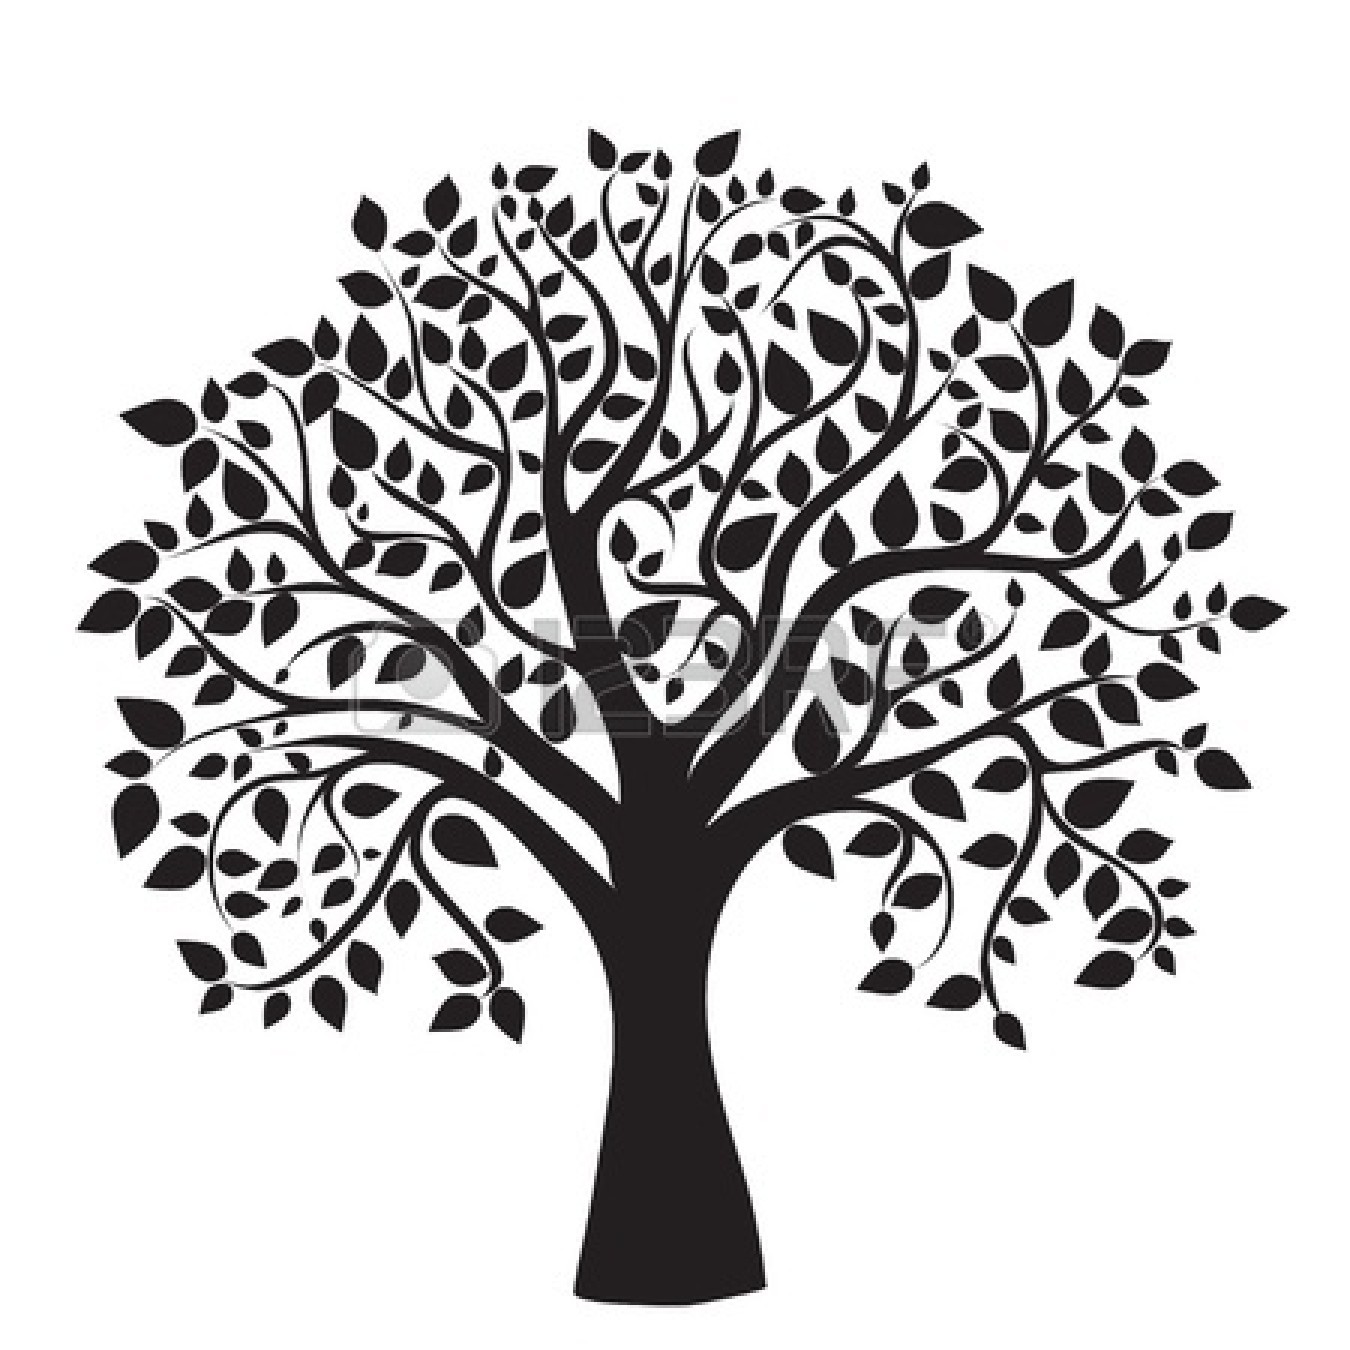 Simple tree silhouette clear background clipart open source 